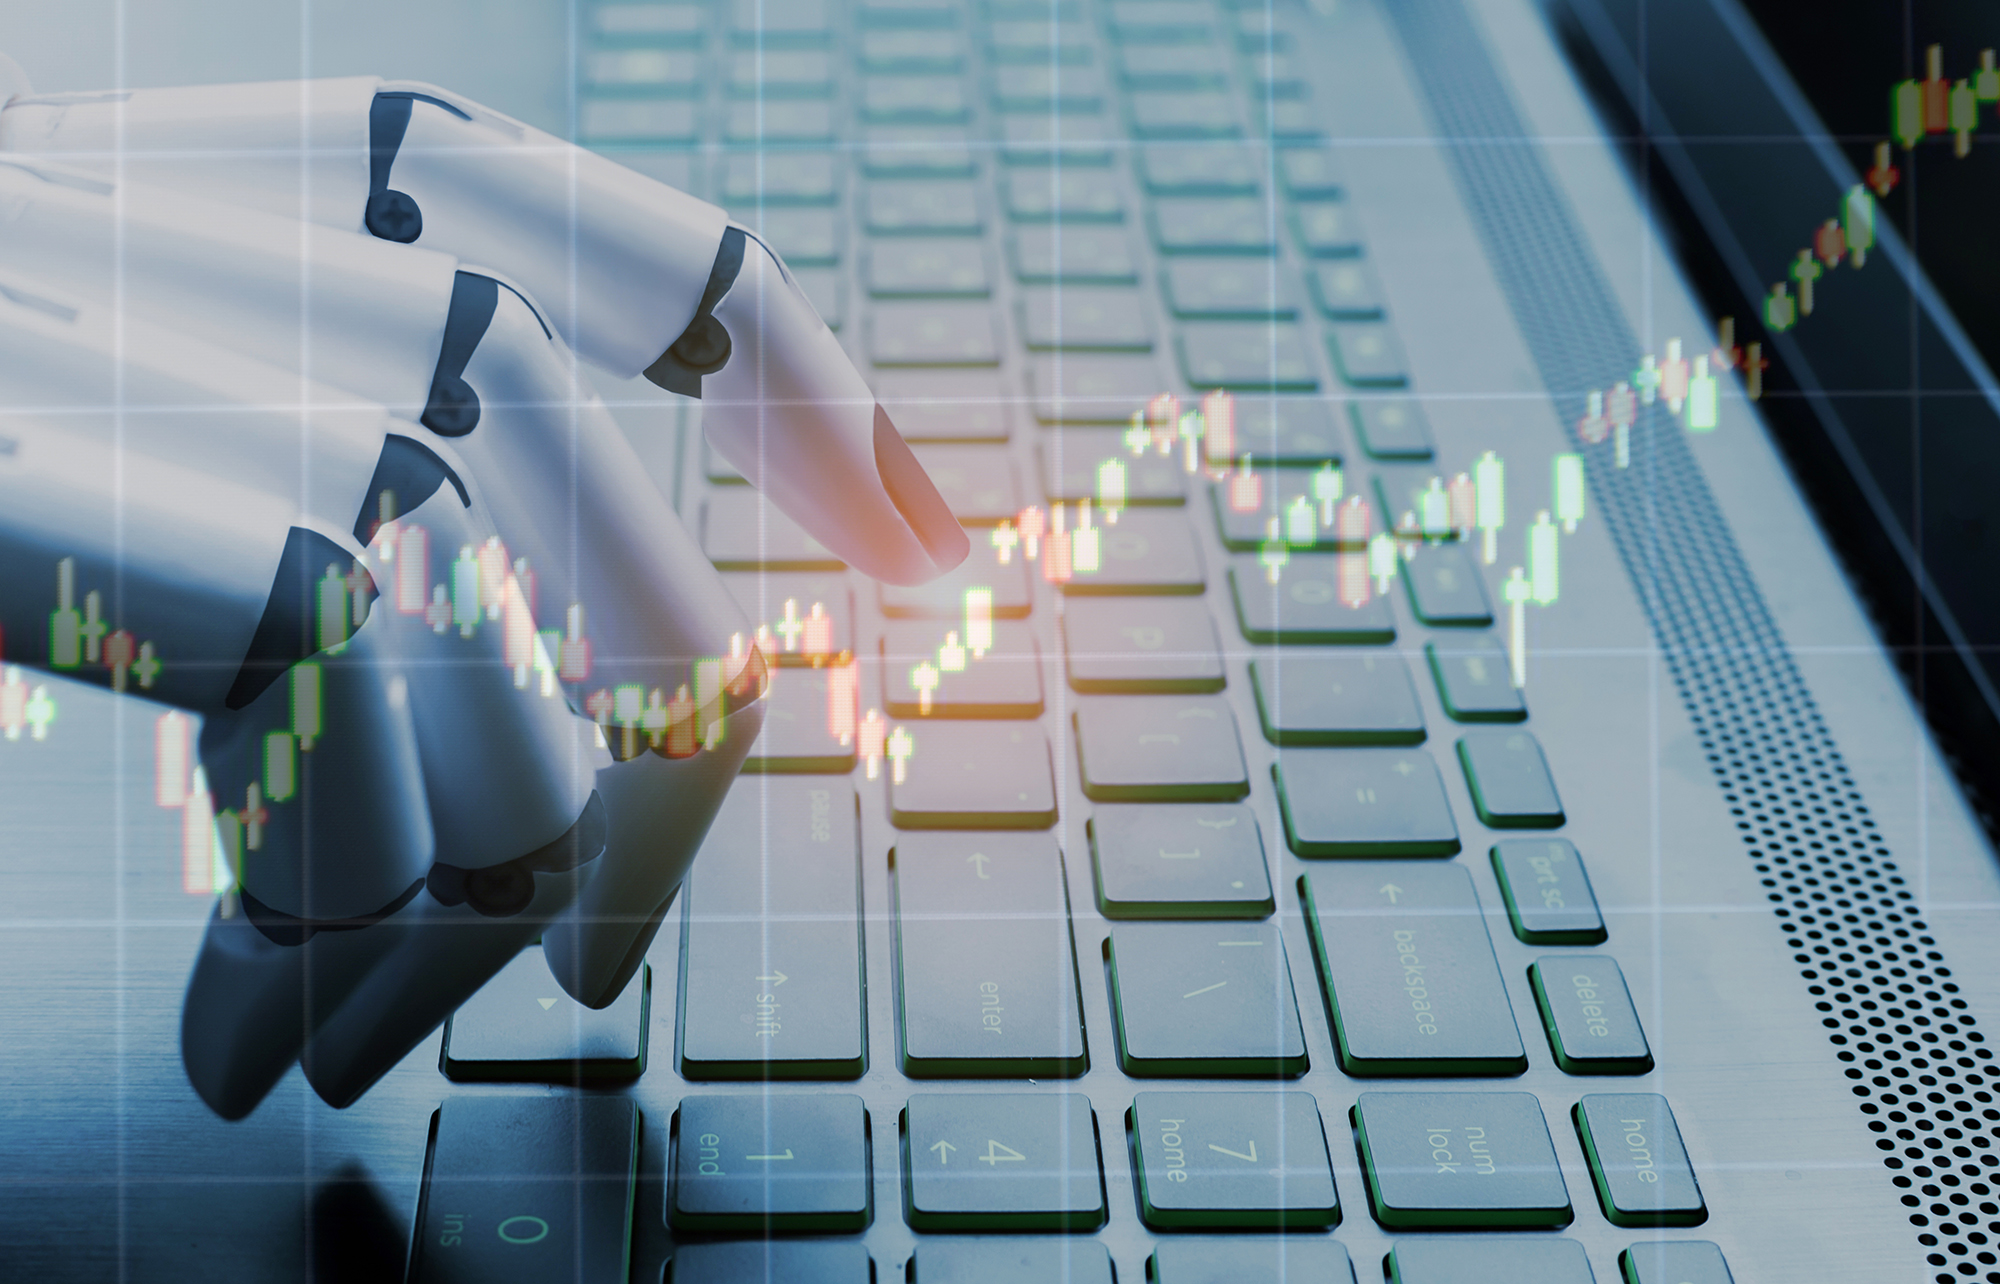 Do forex trading robots really work